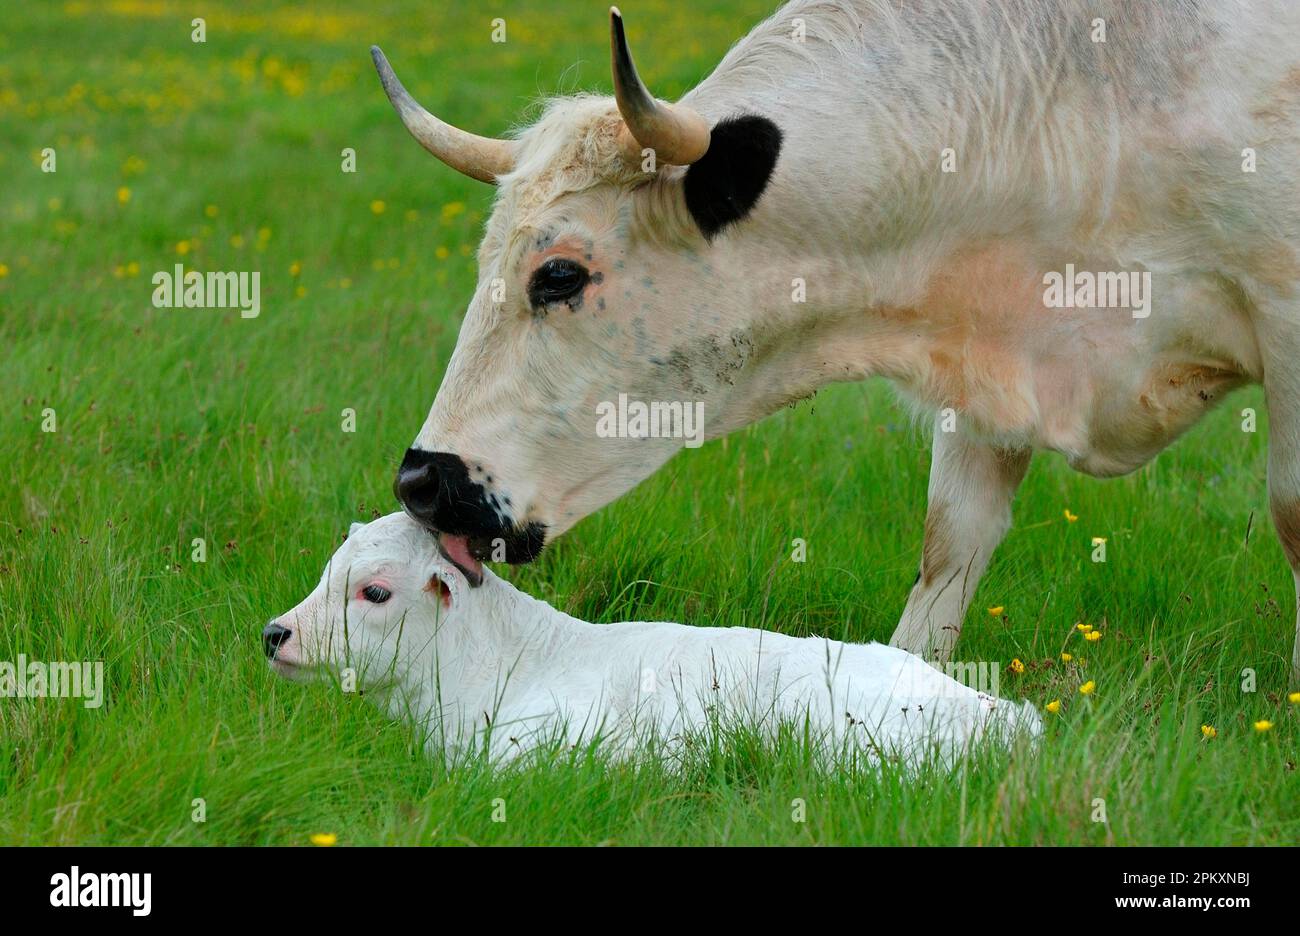 White Park Cattle, newborn calf being licked by mother, Berkshire, England, United Kingdom Stock Photo